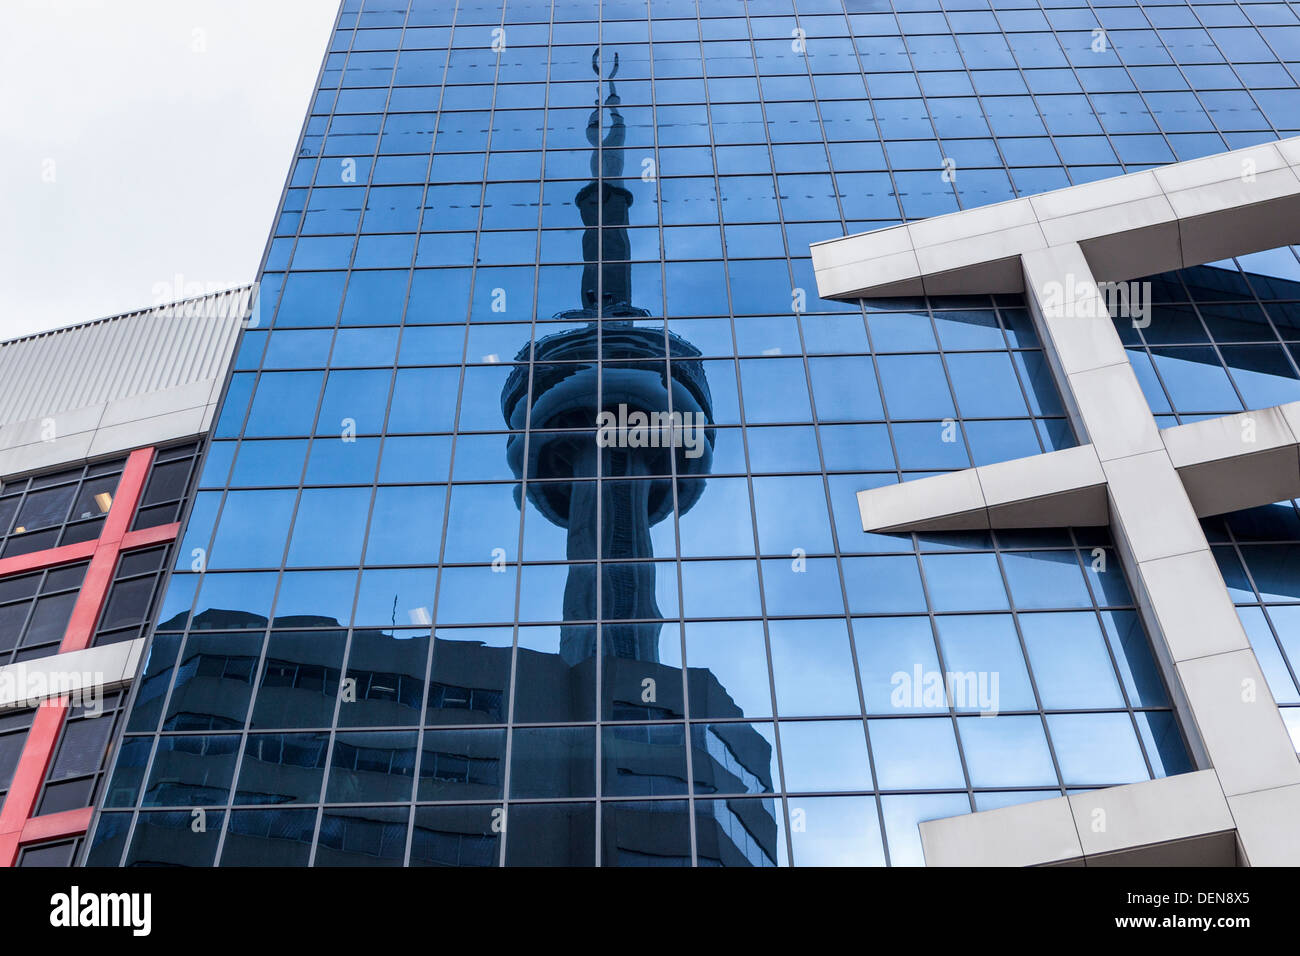 Reflection of the CN tower, the tallest structure in Toronto, in the glass windows of a tall building Stock Photo